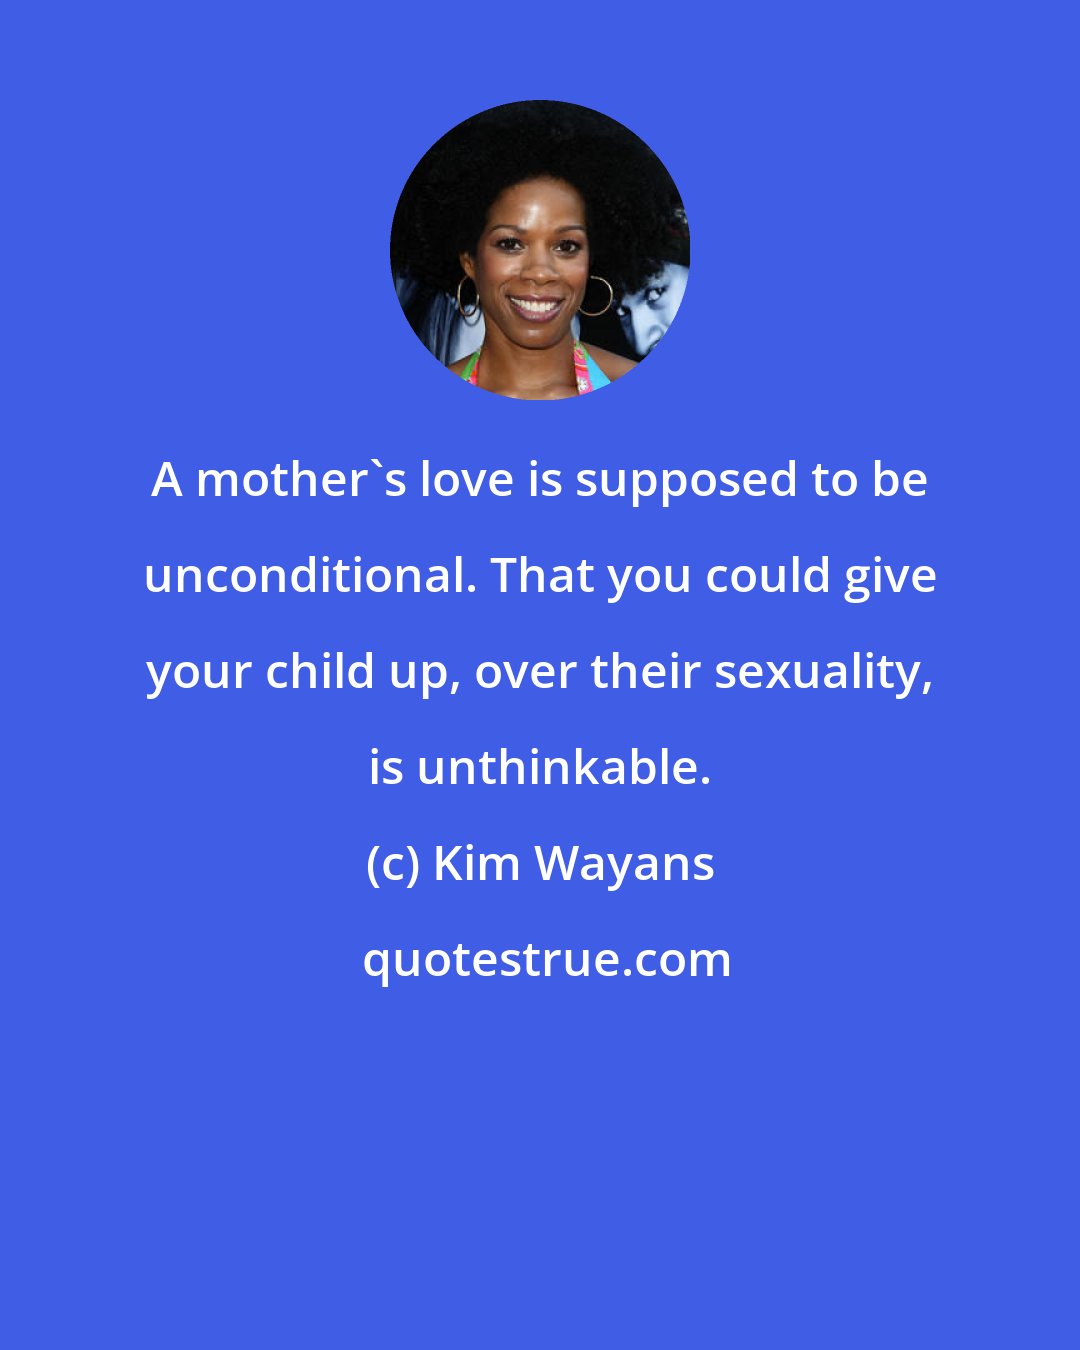 Kim Wayans: A mother's love is supposed to be unconditional. That you could give your child up, over their sexuality, is unthinkable.